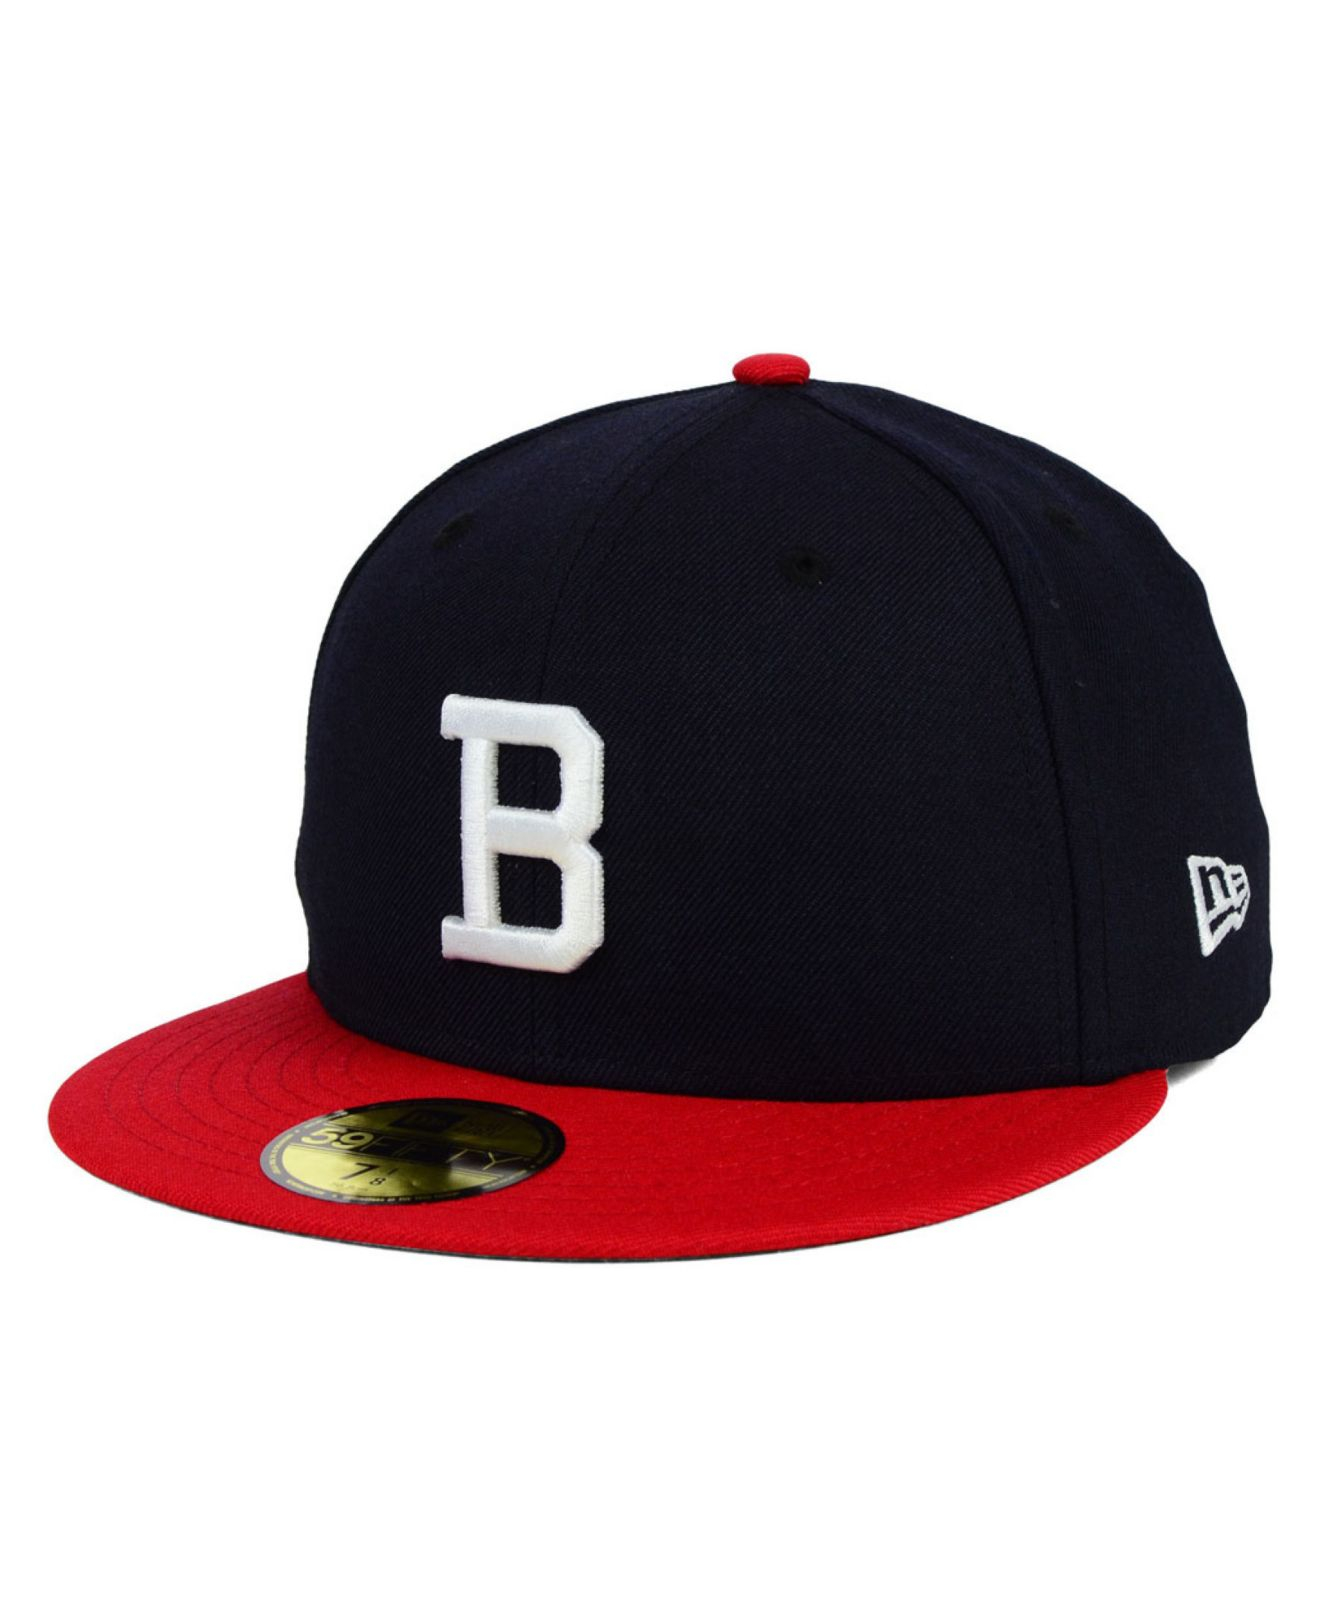 KTZ Boston Braves Cooperstown 59fifty Cap in Navy/Red (Blue) for Men - Lyst